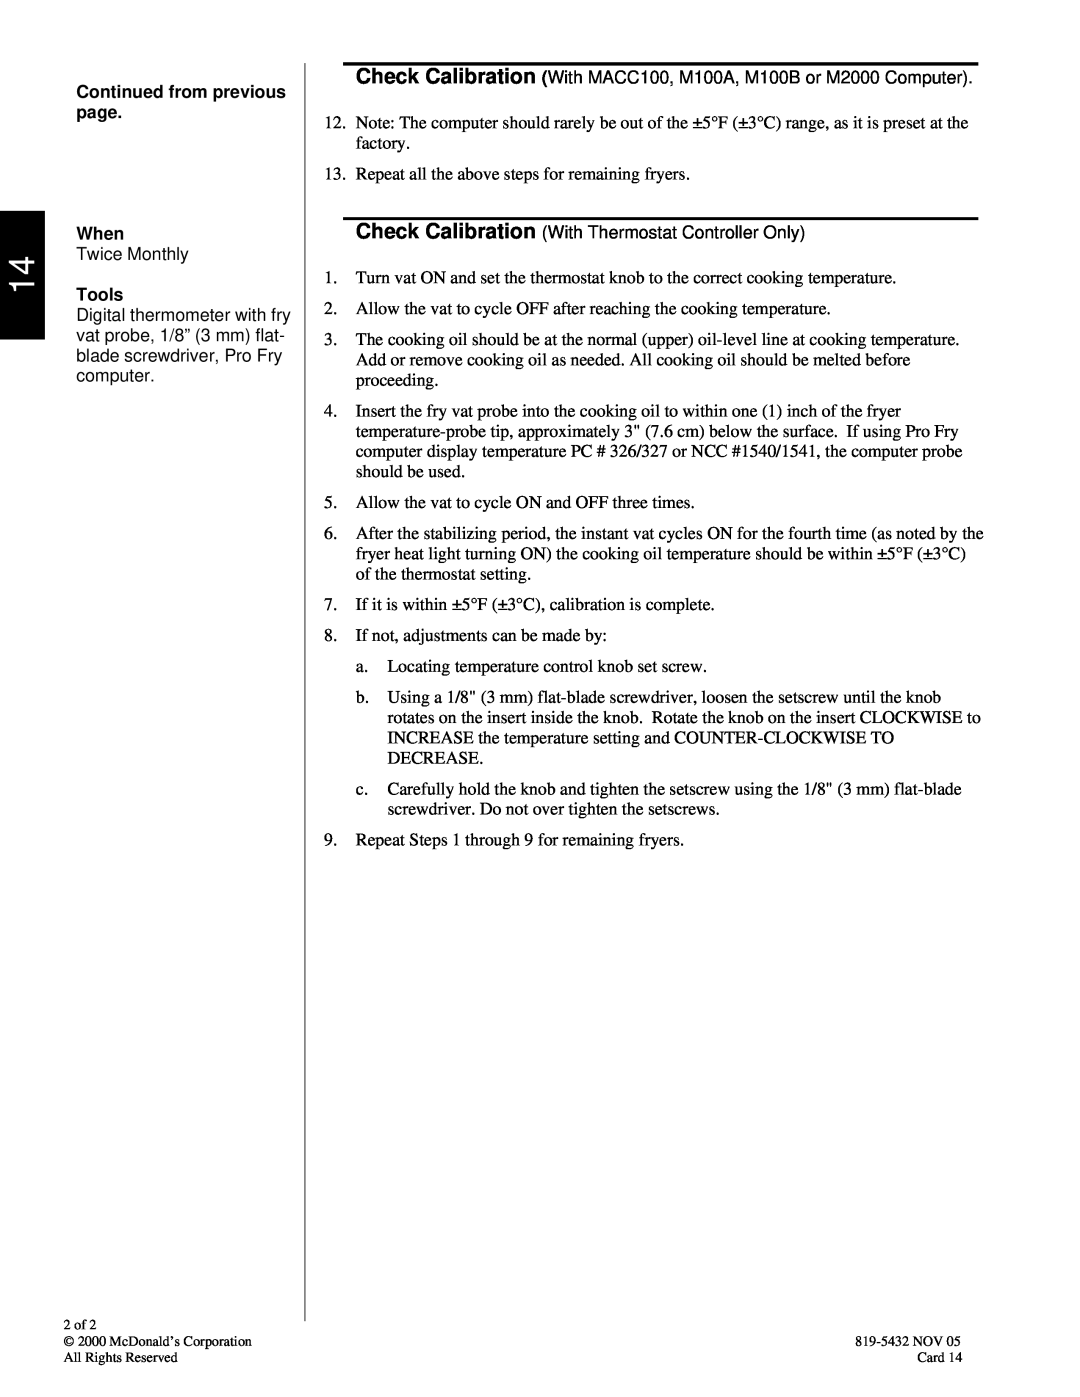 Frymaster 819-5432 manual Continued from previous page, When, Tools, 2 of 